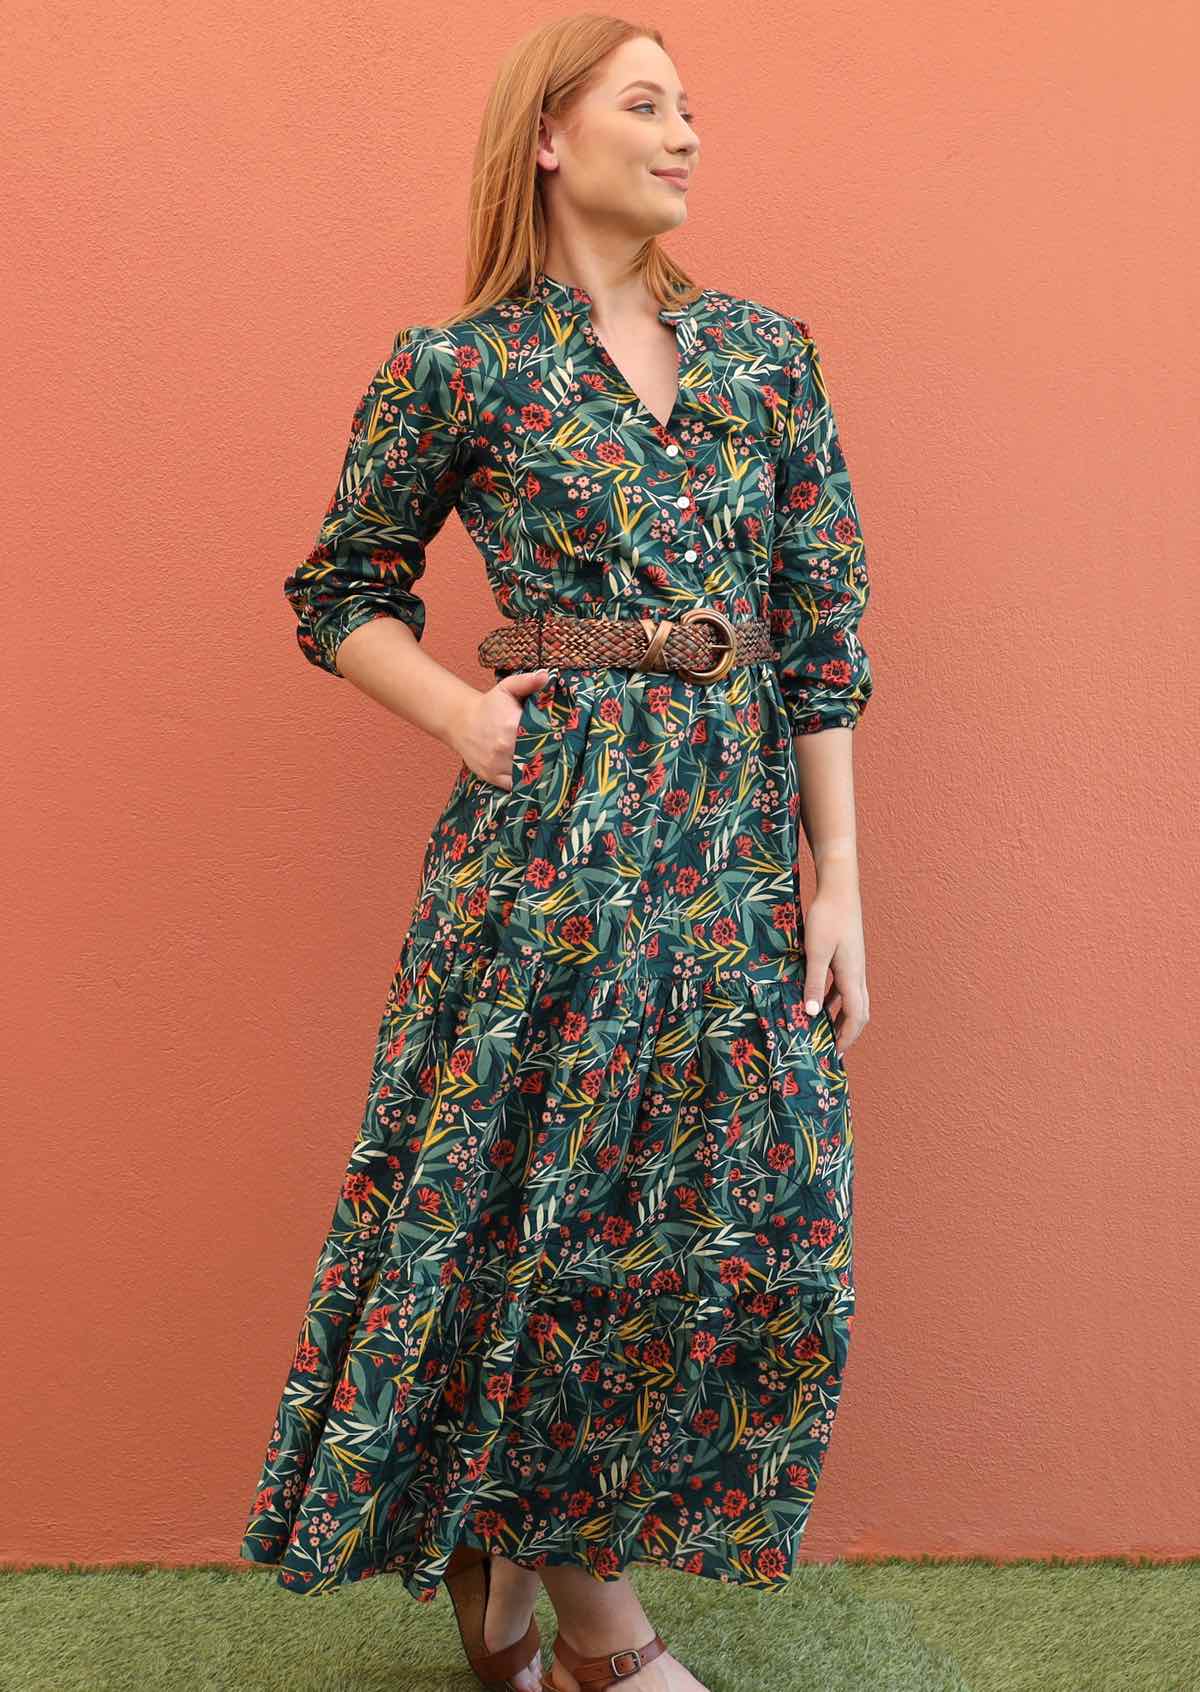 Model pairs maxi dress with a belt for a defined waist. 